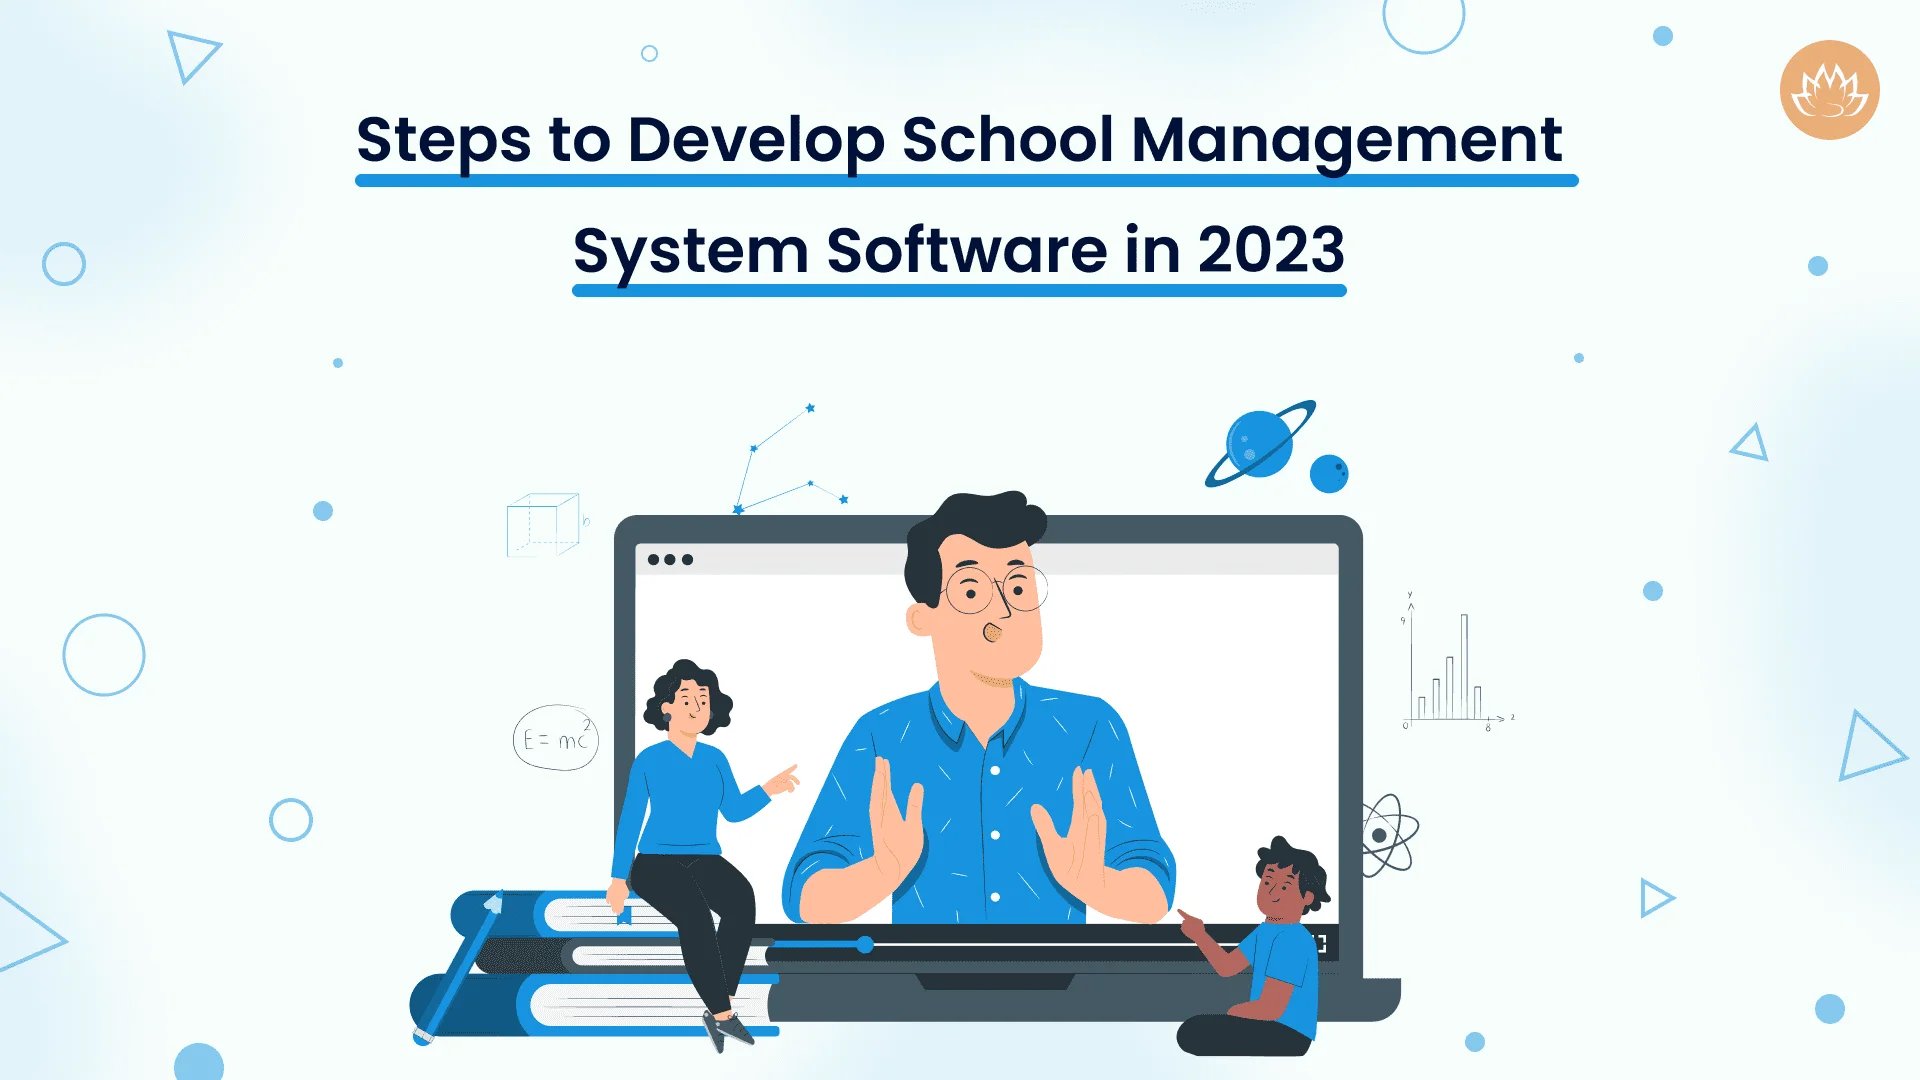 Steps to Develop School Management System Software in 2023